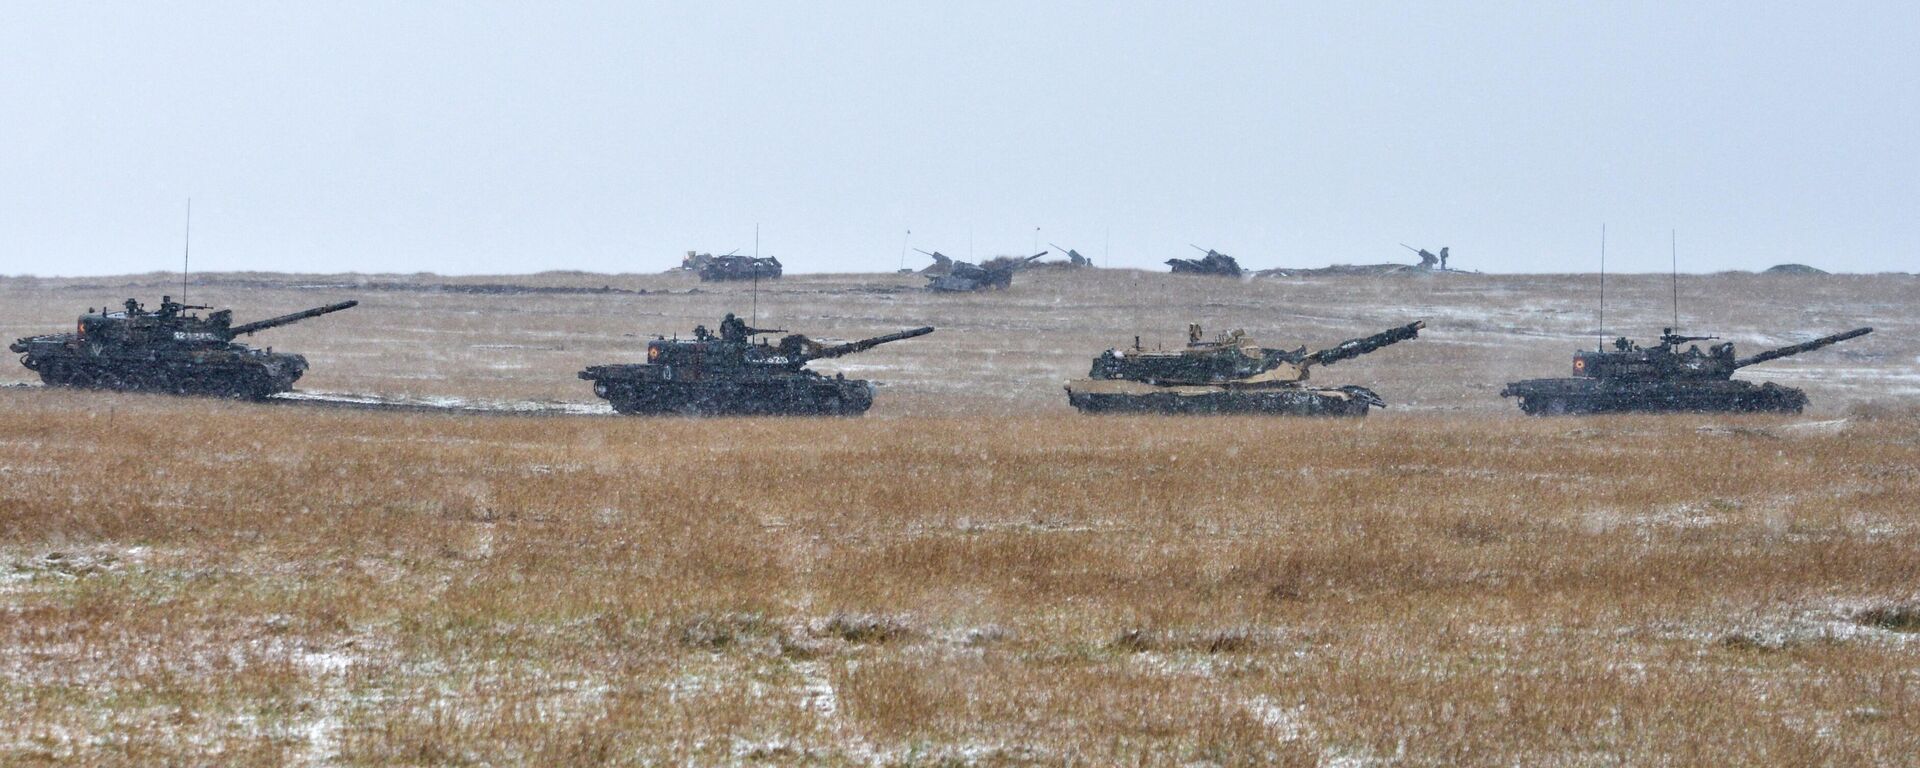 Romanian tanks TR-85M1 Bizonul and American main battle tank M1A1 Abrams at the US and Romania joint military exercise within operation Atlantic Resolve in Romania. - Sputnik International, 1920, 29.01.2024